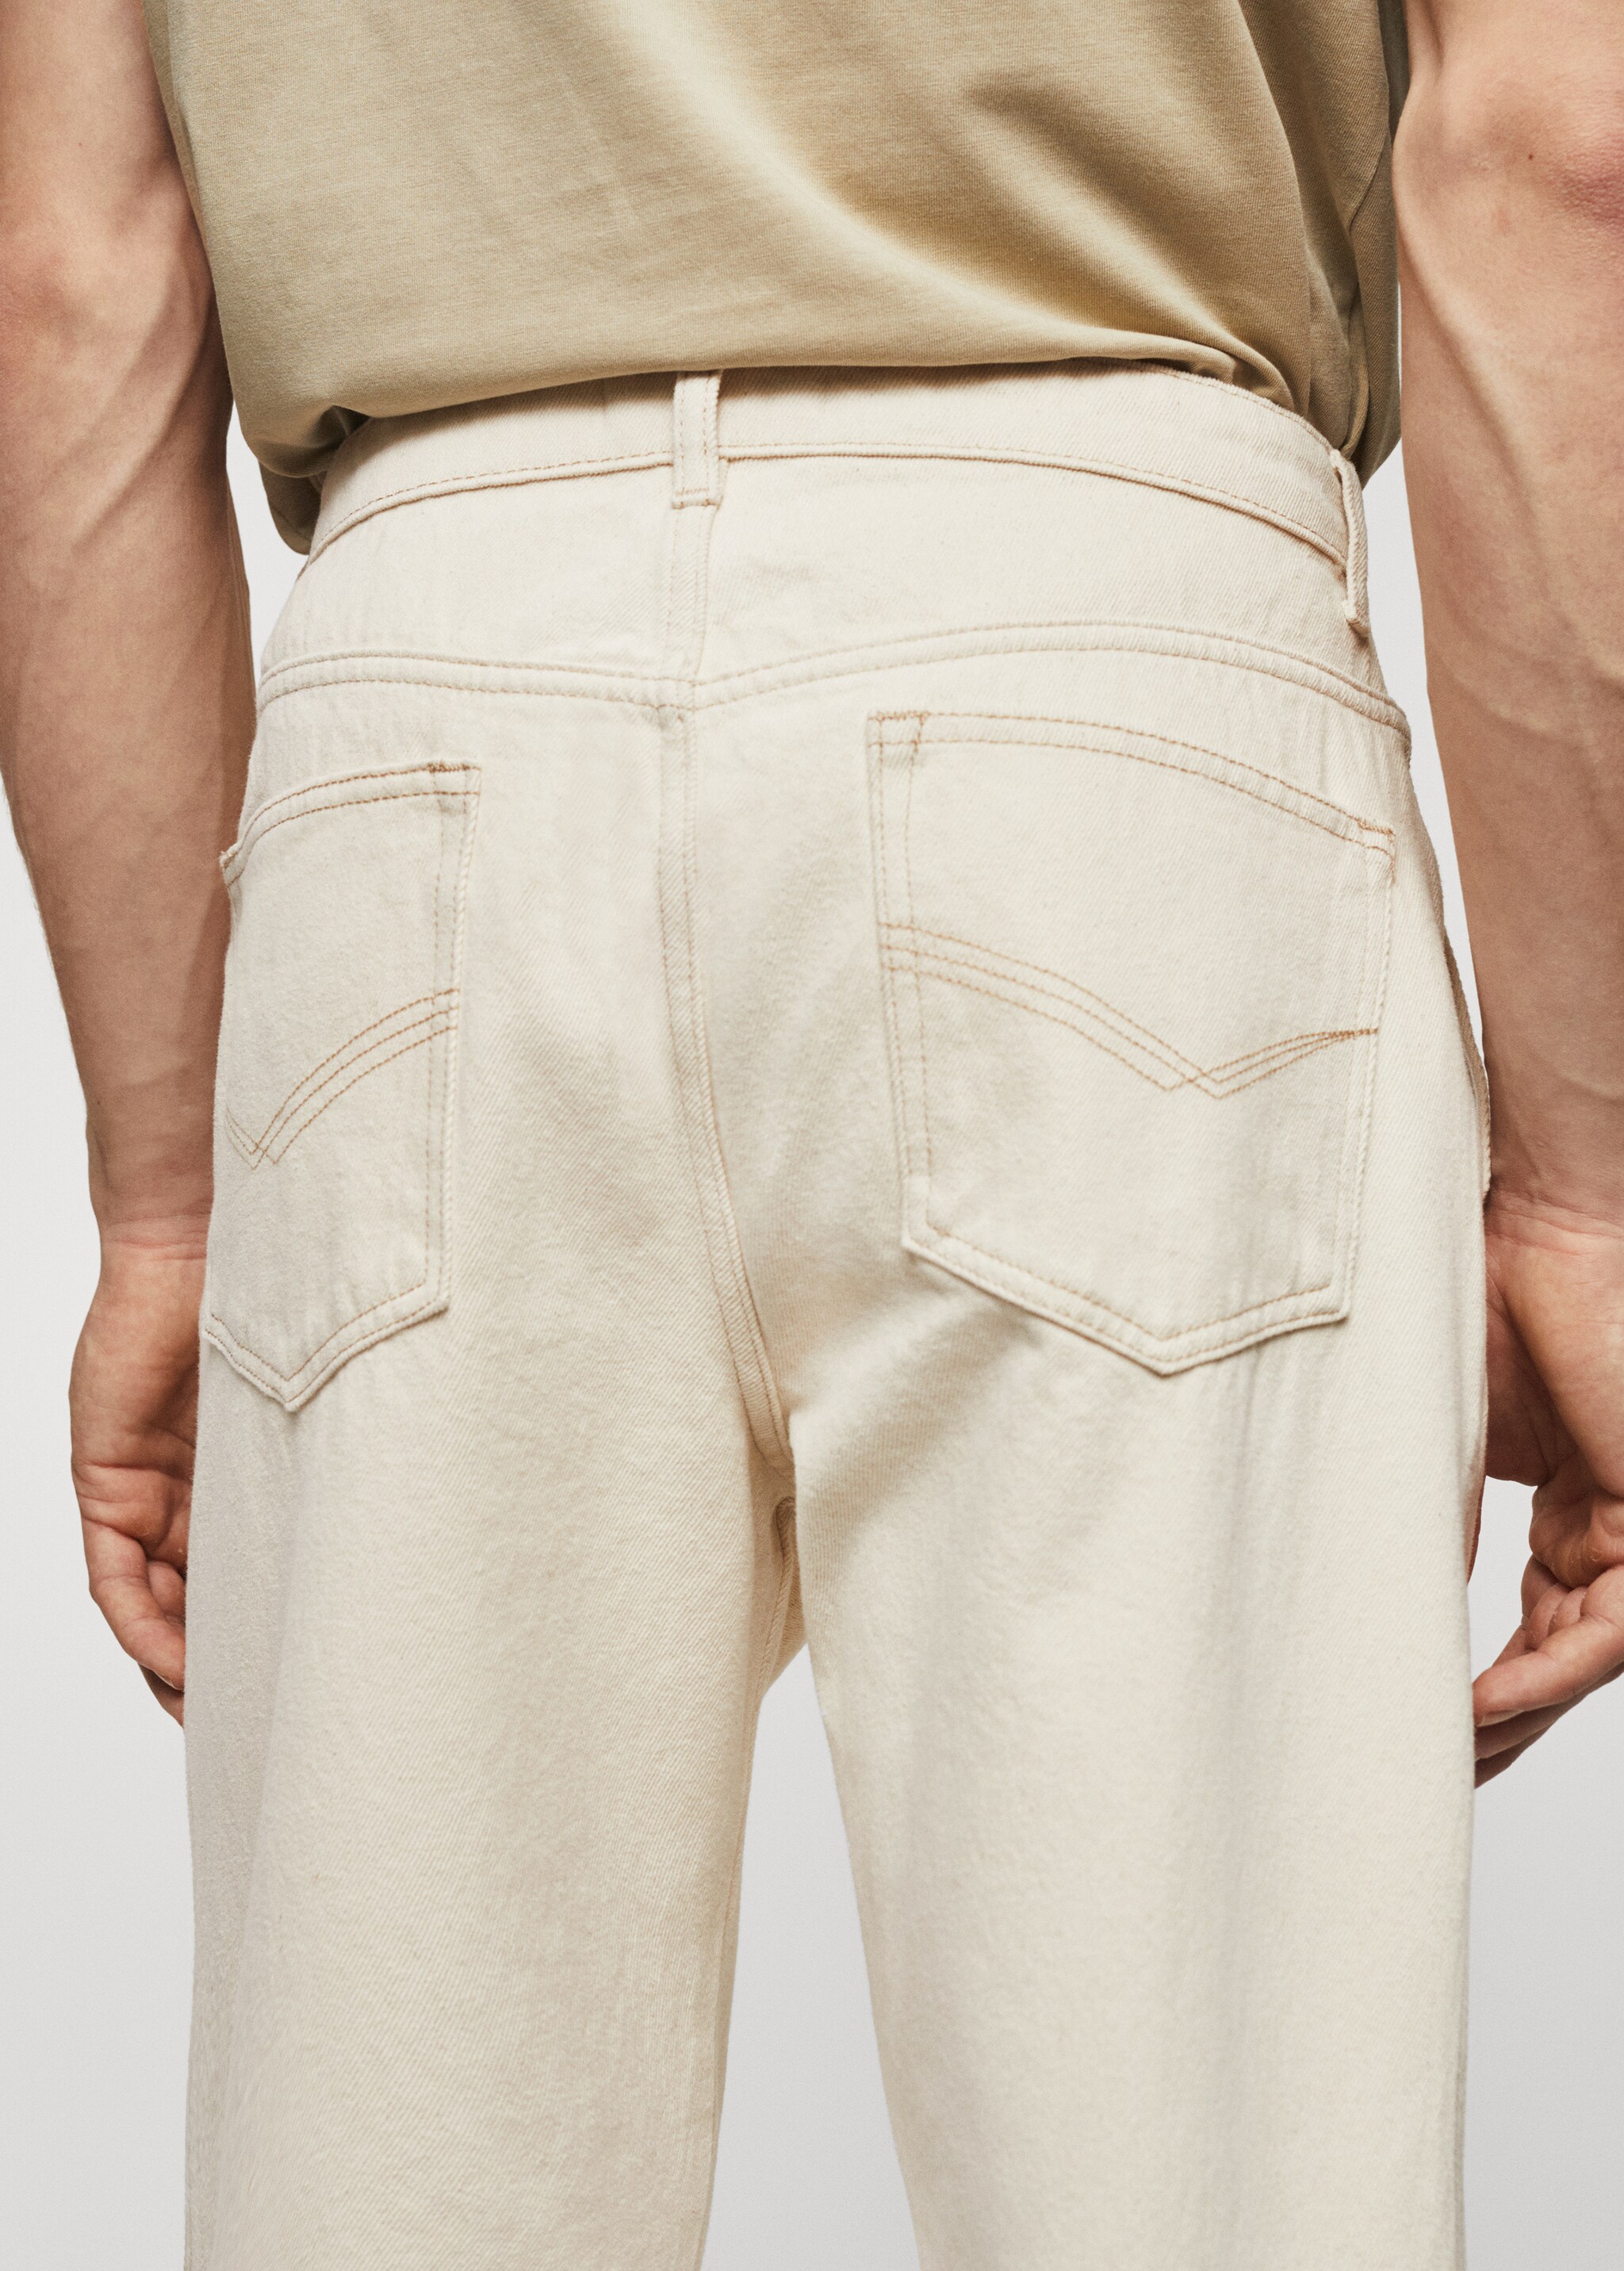 Dart slouchy jeans - Details of the article 2